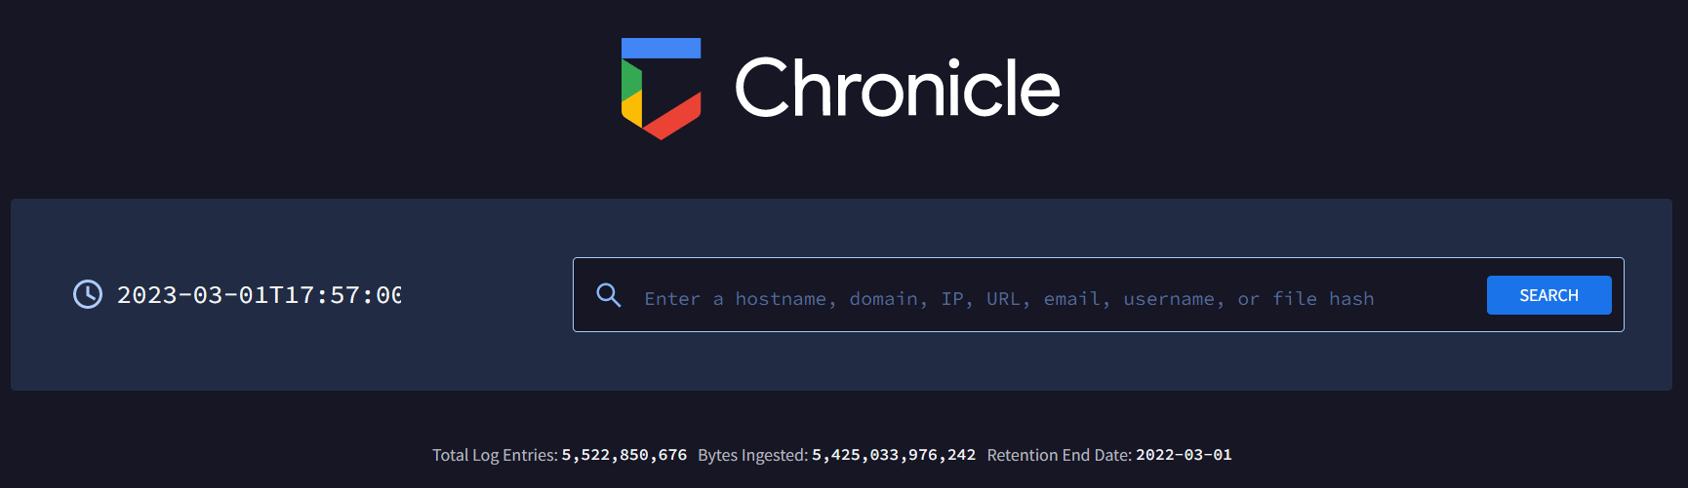 chronicle-search